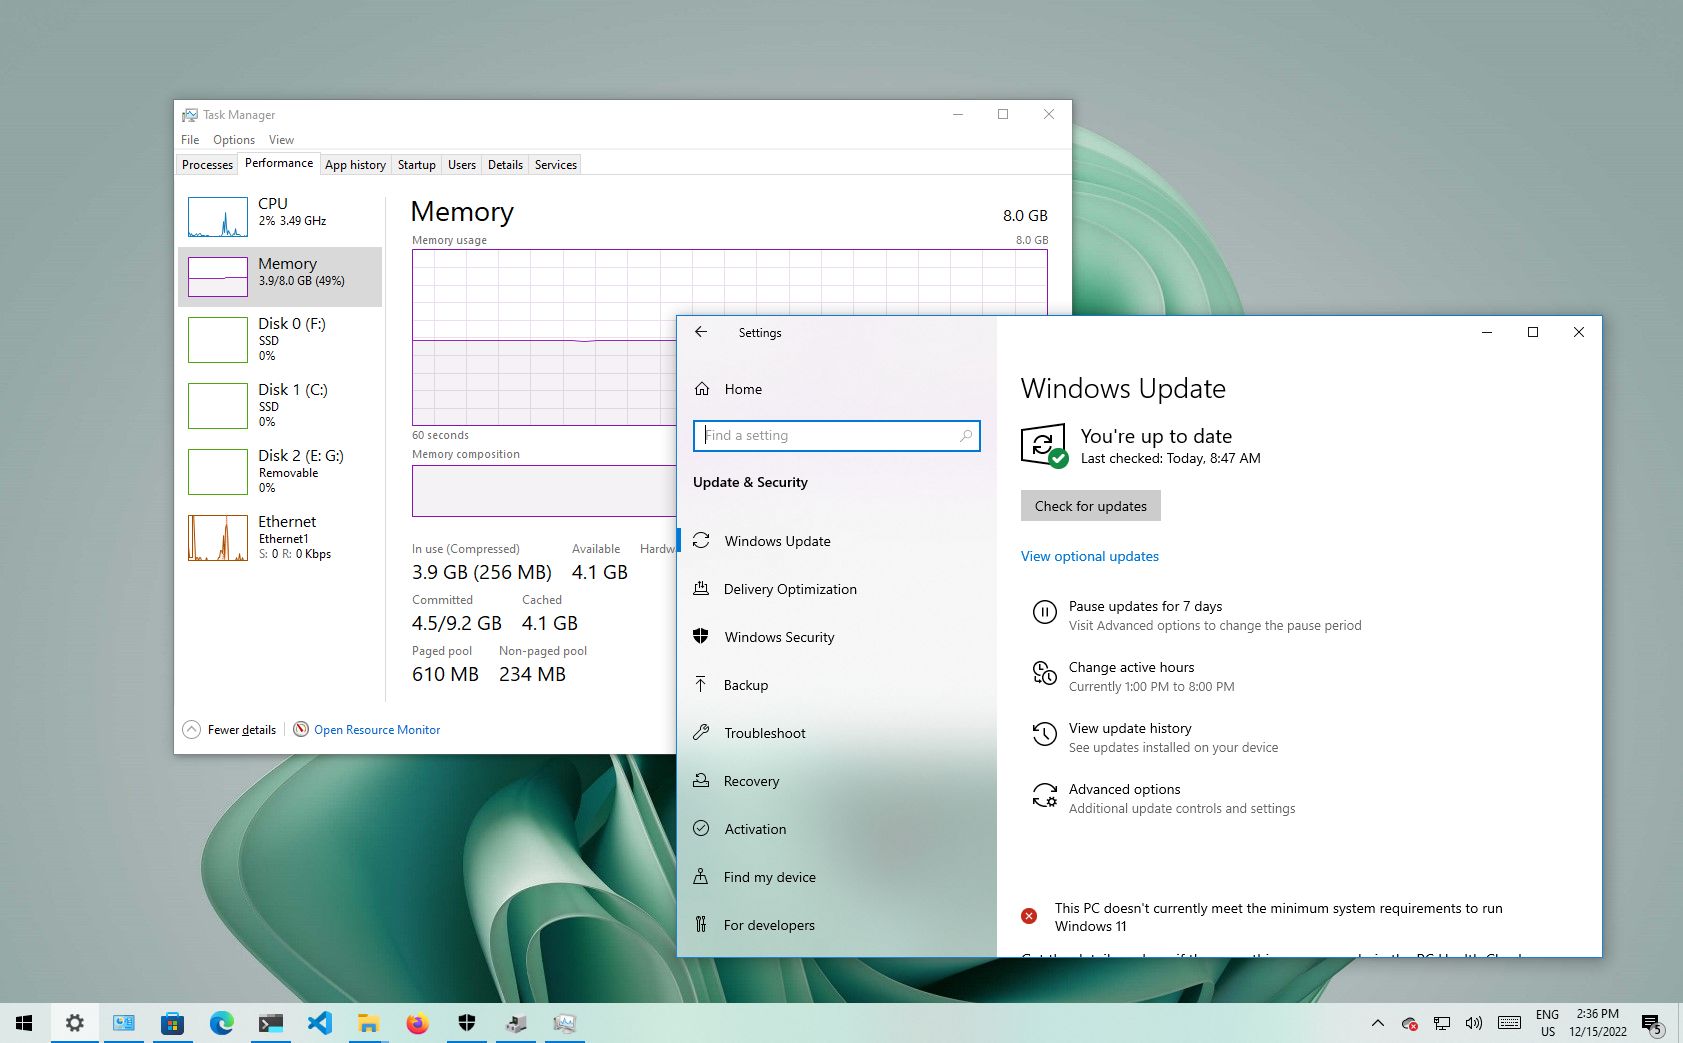 Enhanced desktop customization options
Improved performance and stability